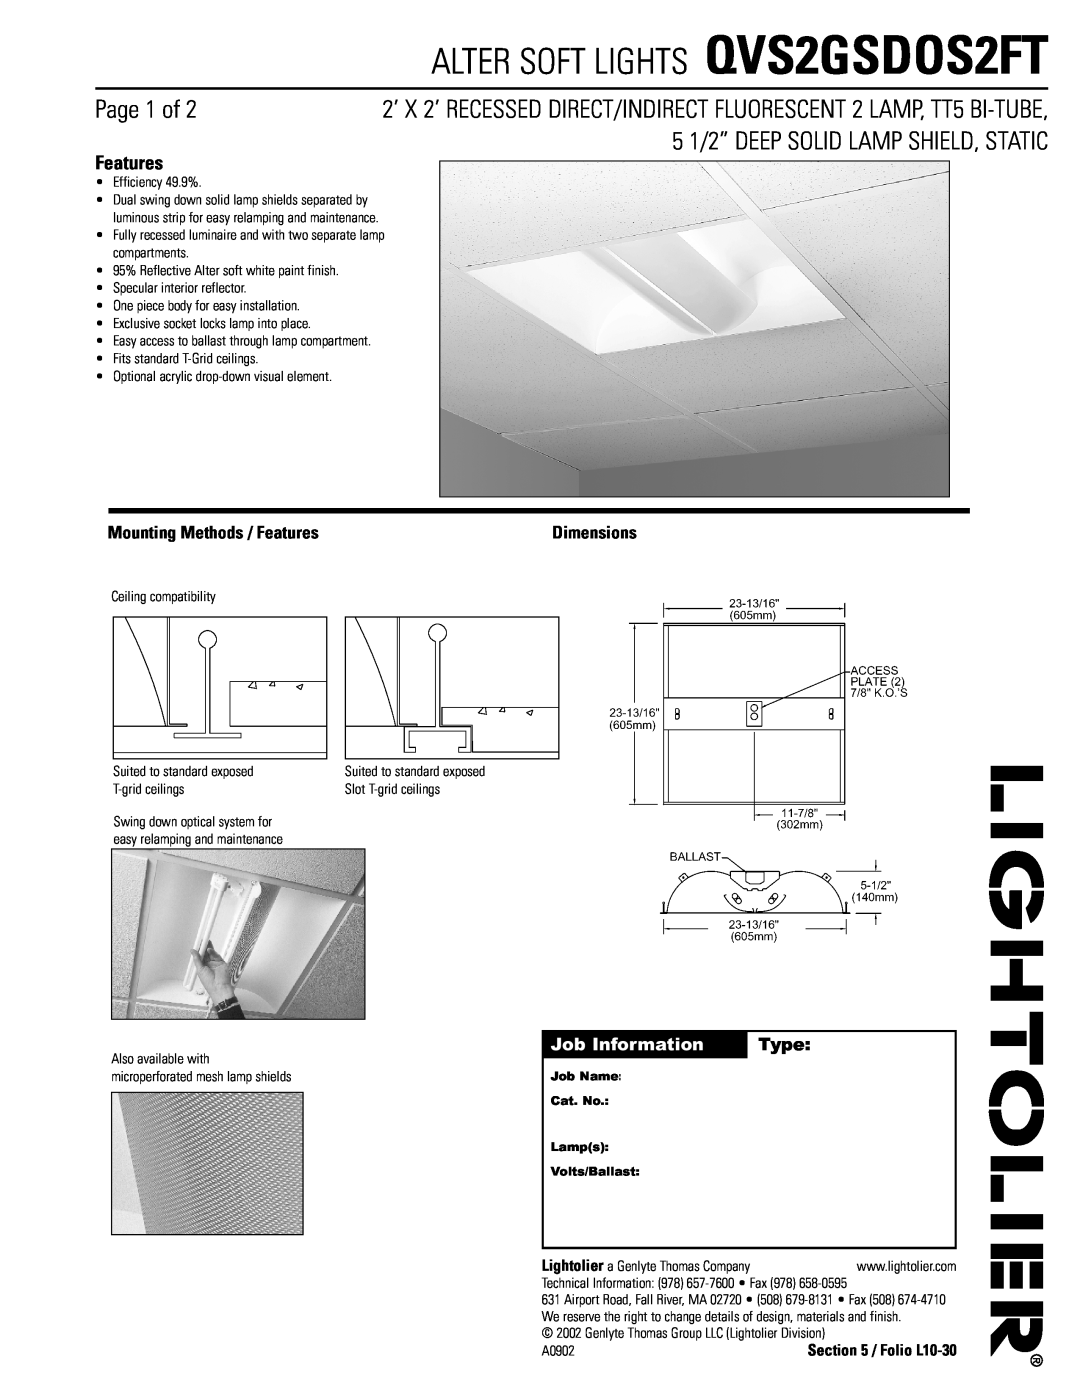 Lightolier dimensions ALTER SOFT LIGHTS QVS2GSDOS2FT, Page 1 of, 5 1/2” DEEP SOLID LAMP SHIELD, STATIC, Features, Type 